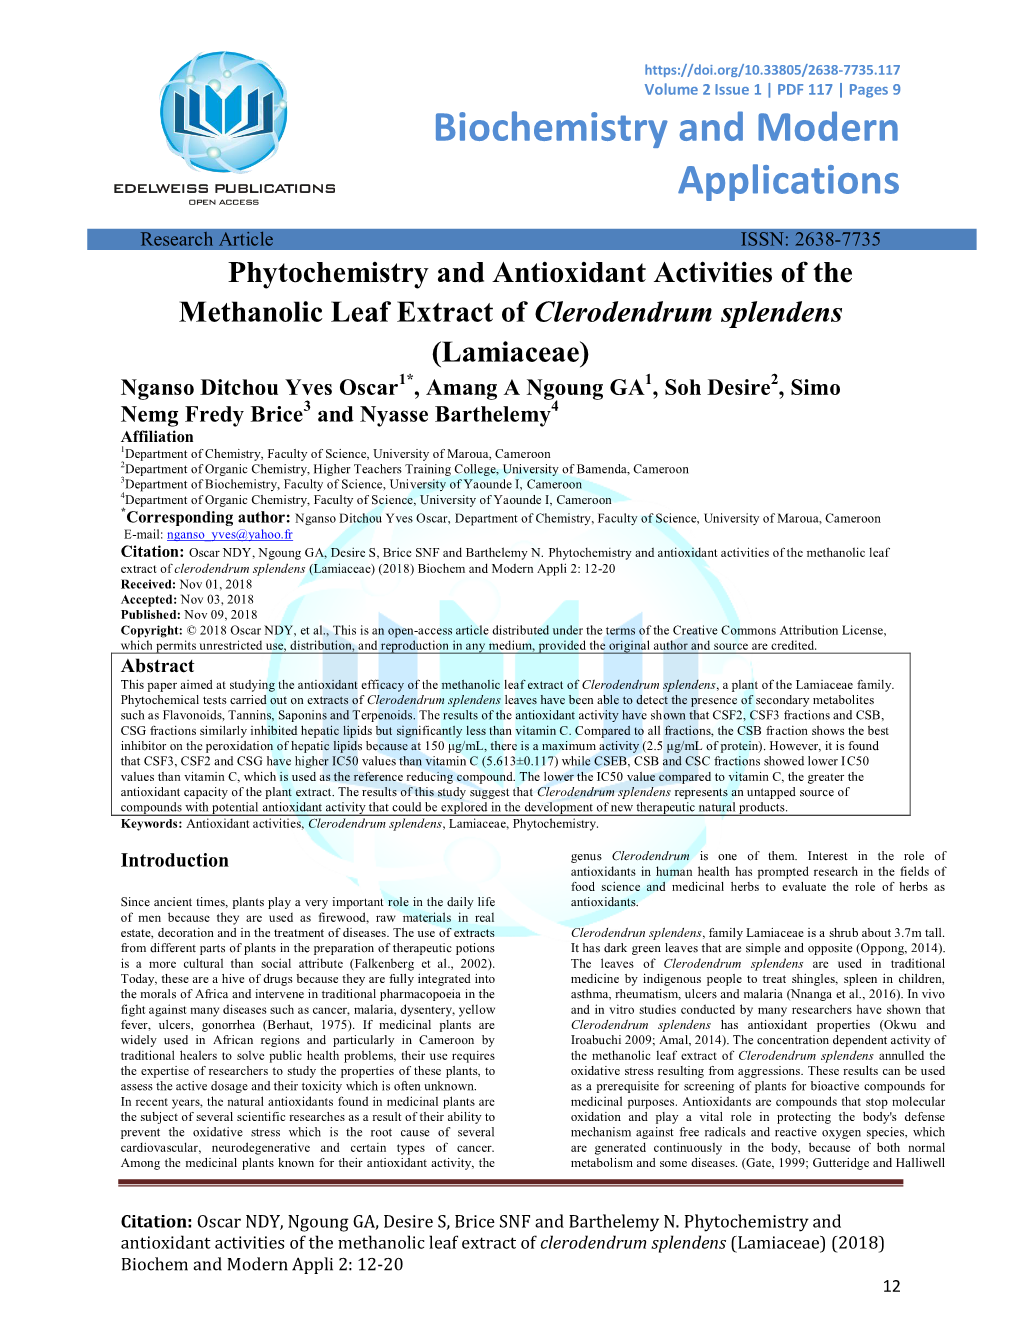 Phytochemistry and Antioxidant Activities of the Methanolic Leaf